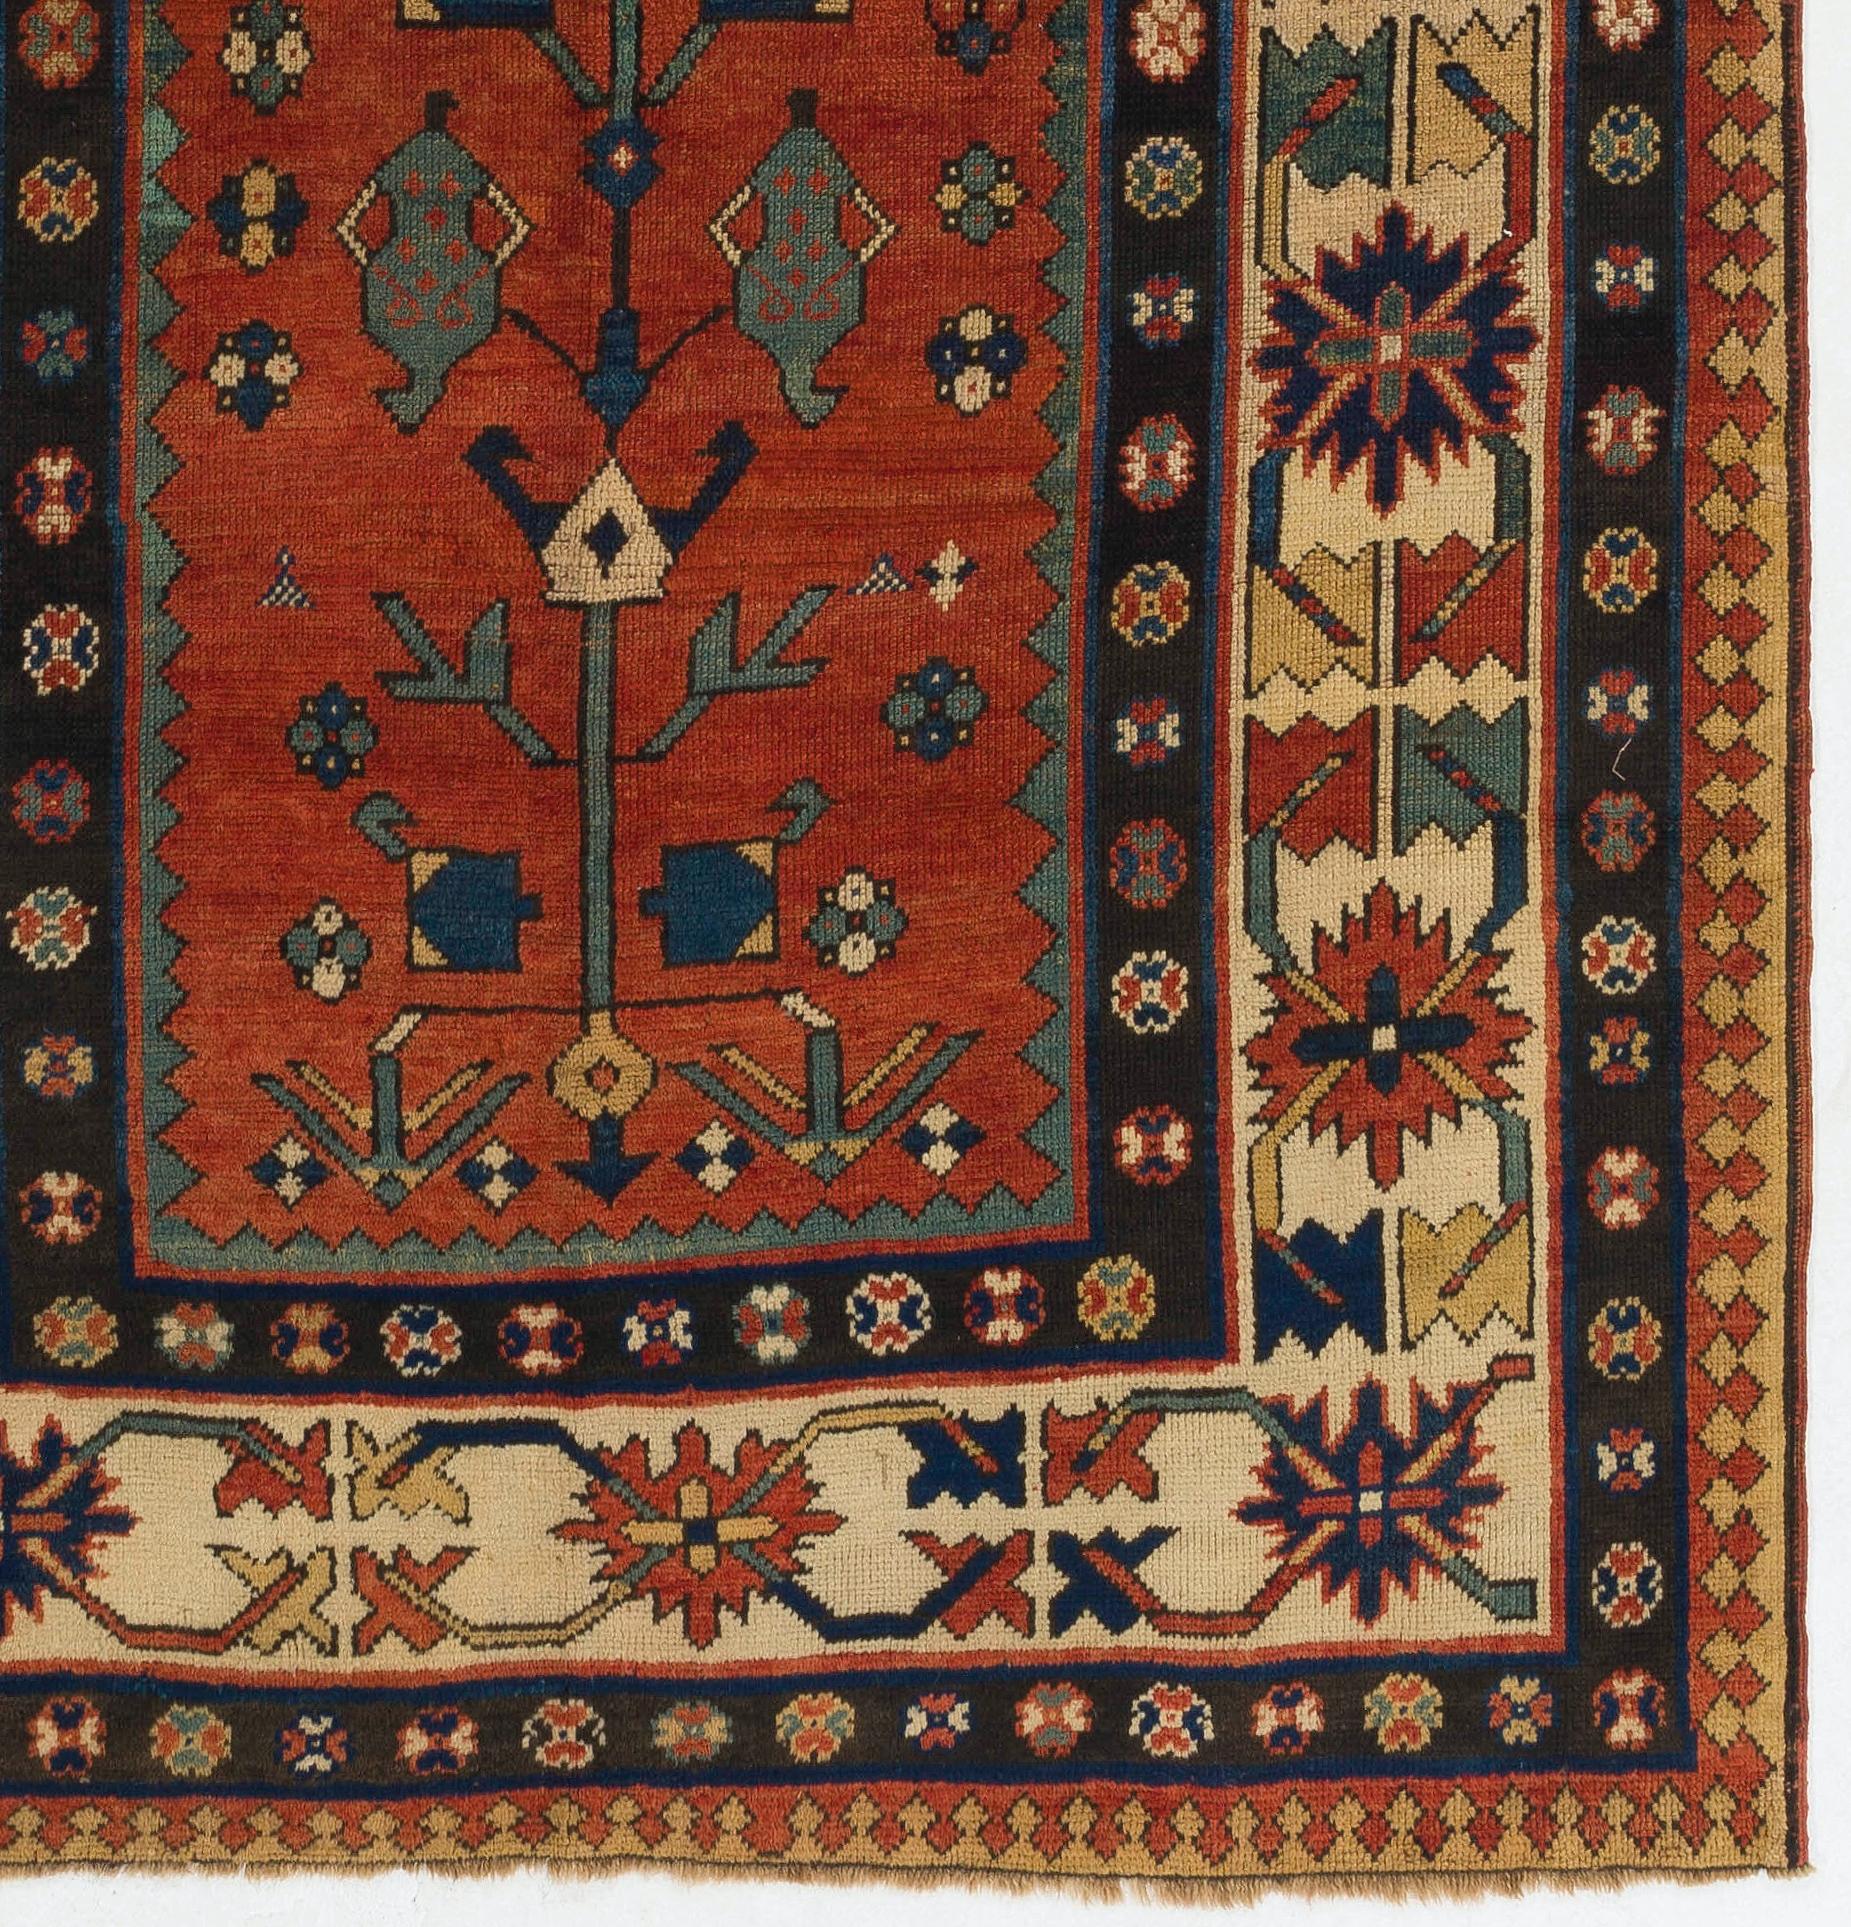 Hand-Knotted 5x8 Ft Antique Caucasian Karabagh Rug, Late 19th Century